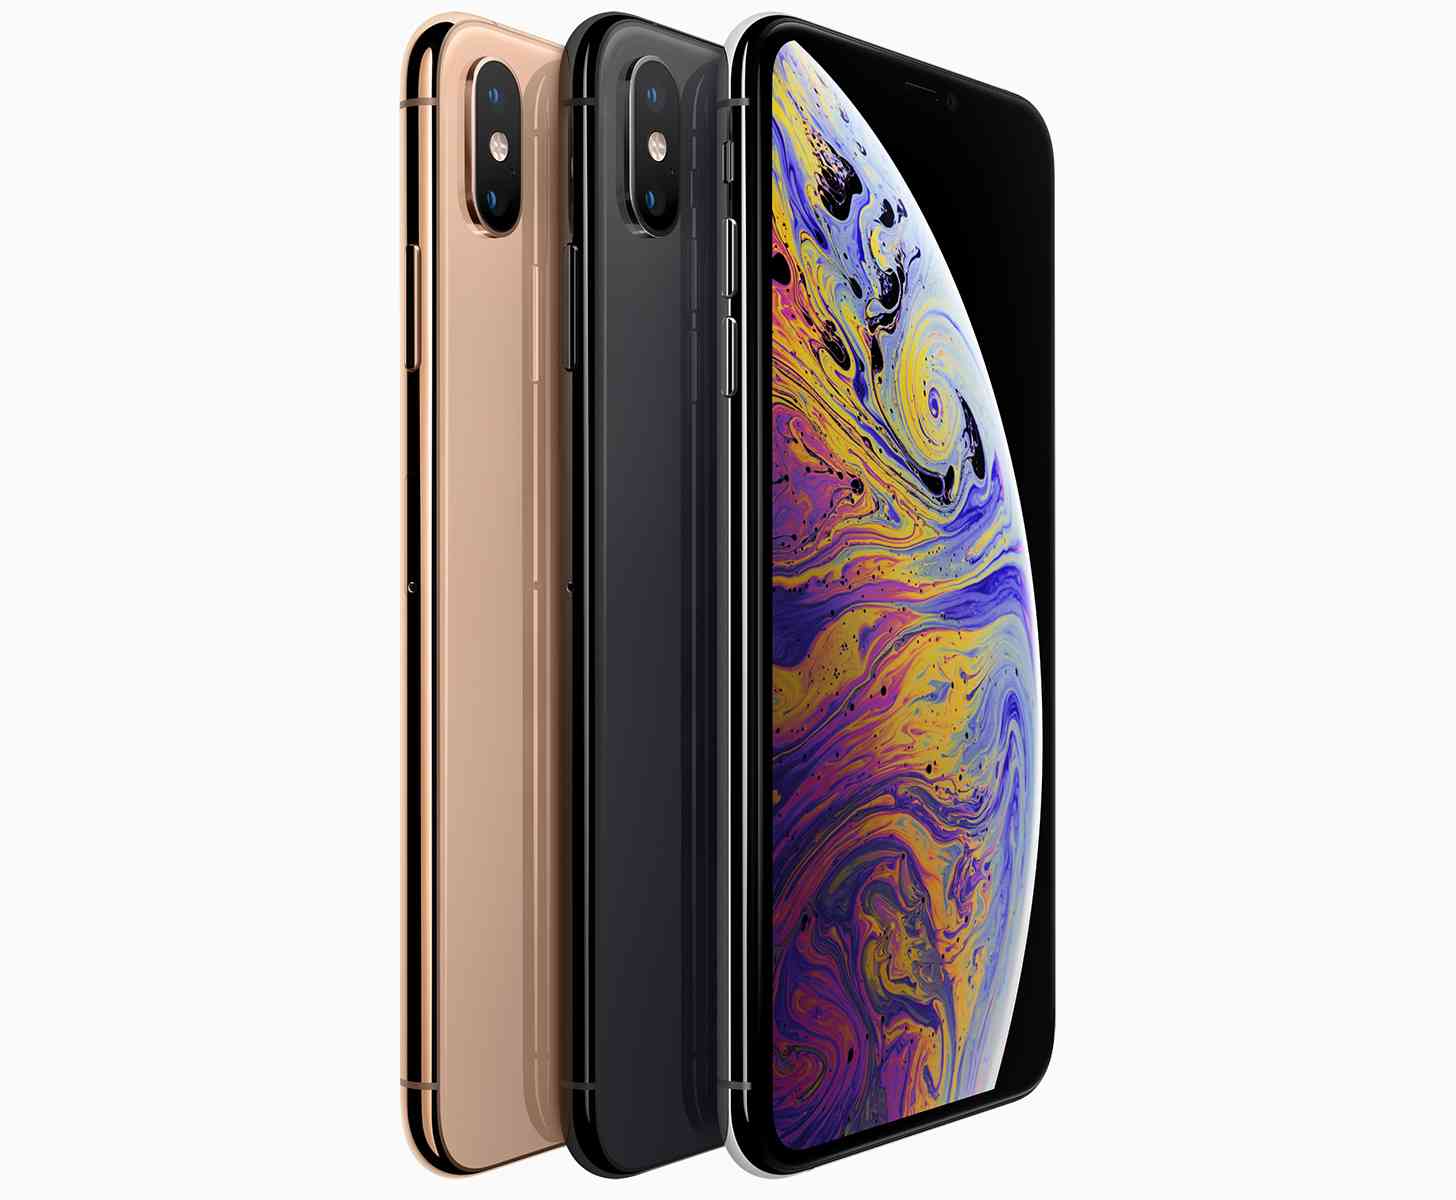 iPhone Xs silver, space gray, gold official